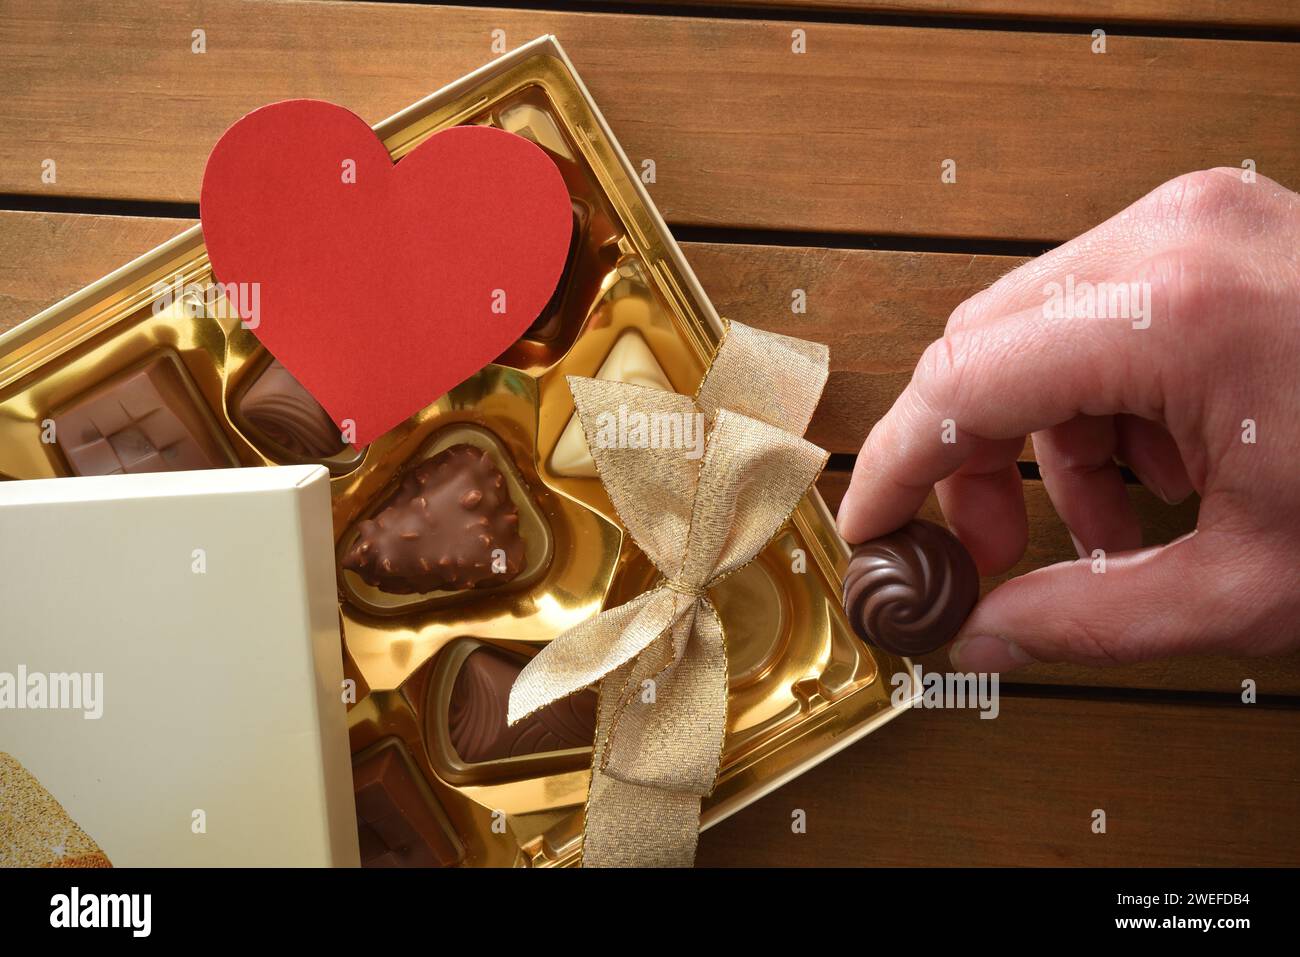 Gift box with golden bow full of assortment of chocolates on wooden table and hand taking a chocolate to try. Top view. Stock Photo